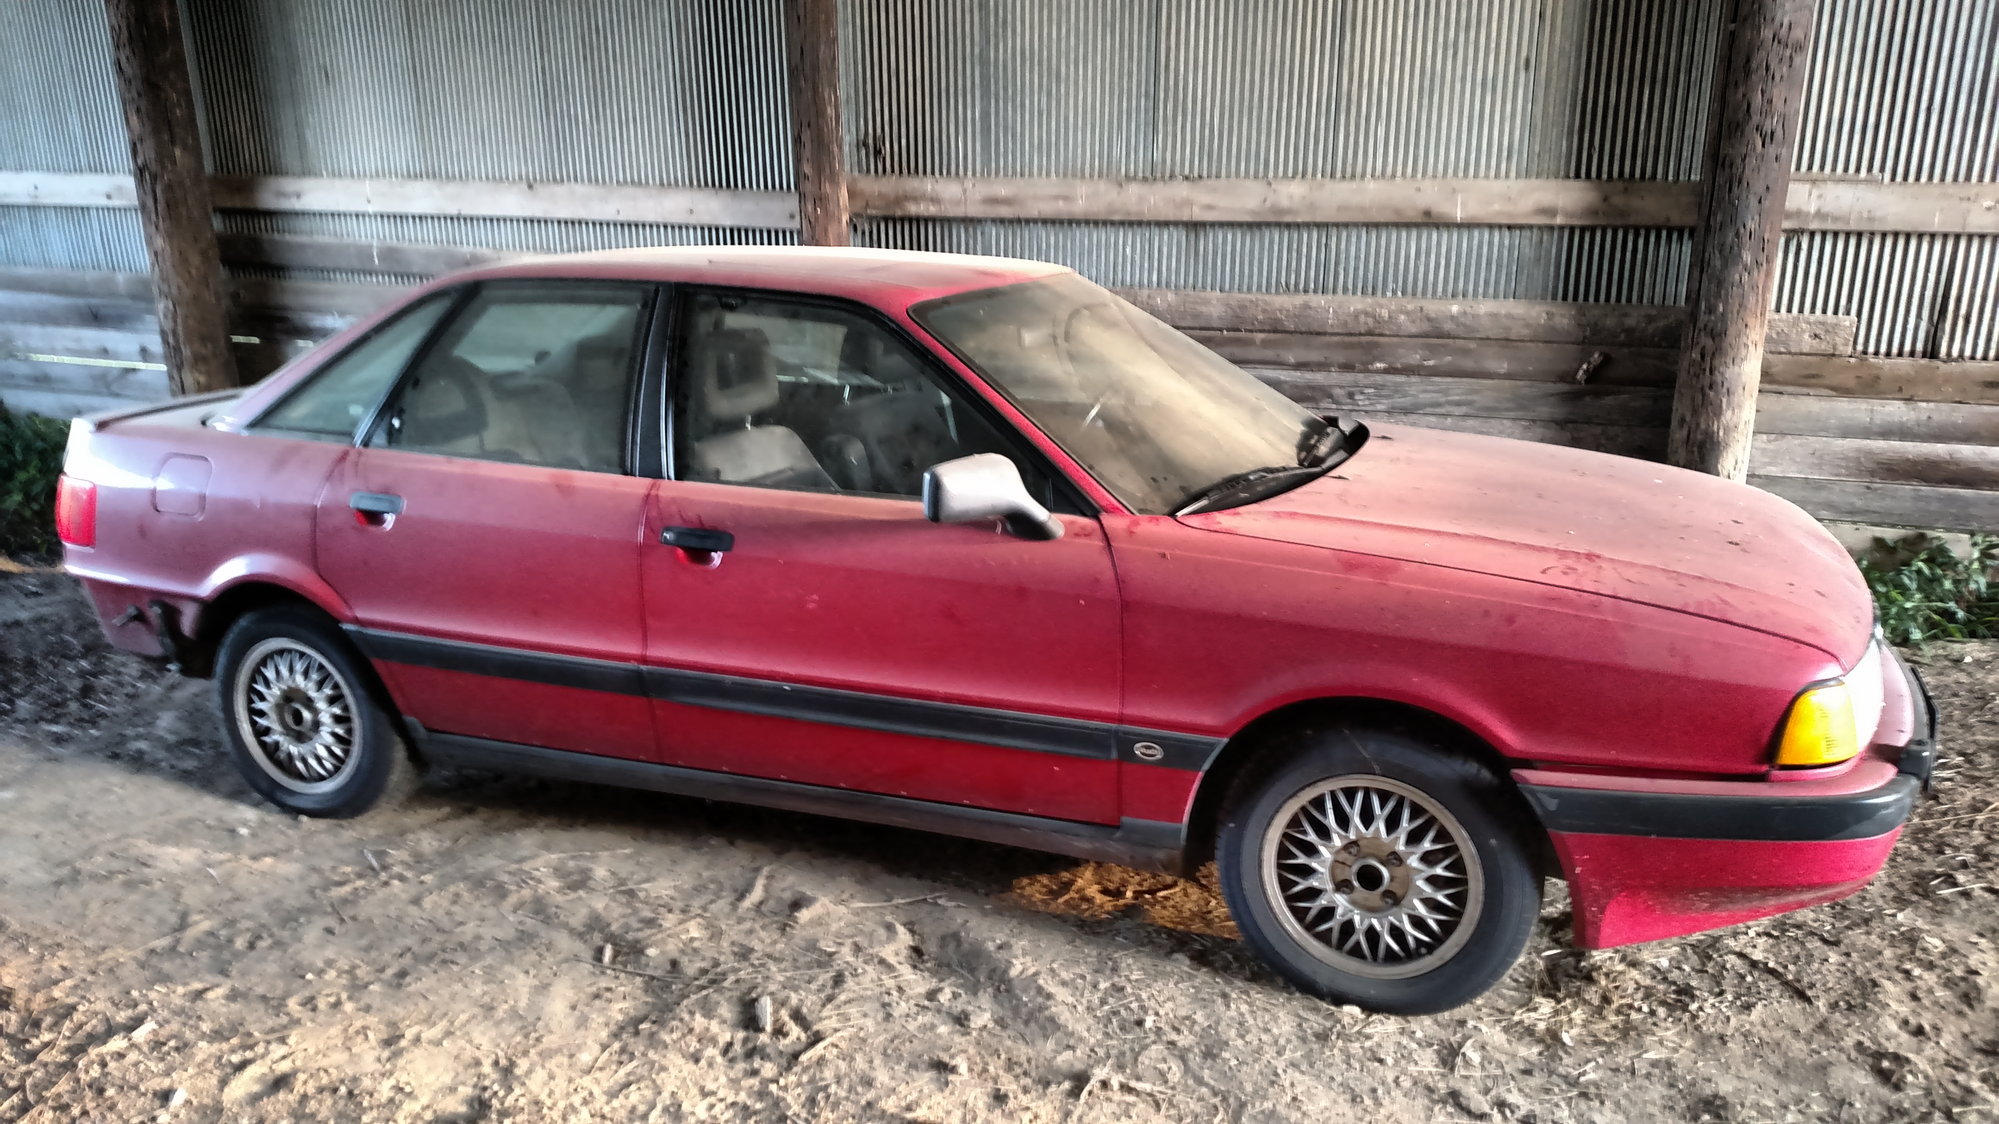 Audi Other 1991 Audi 80 Quattro 5 speed for sale or parts - AudiWorld Forums